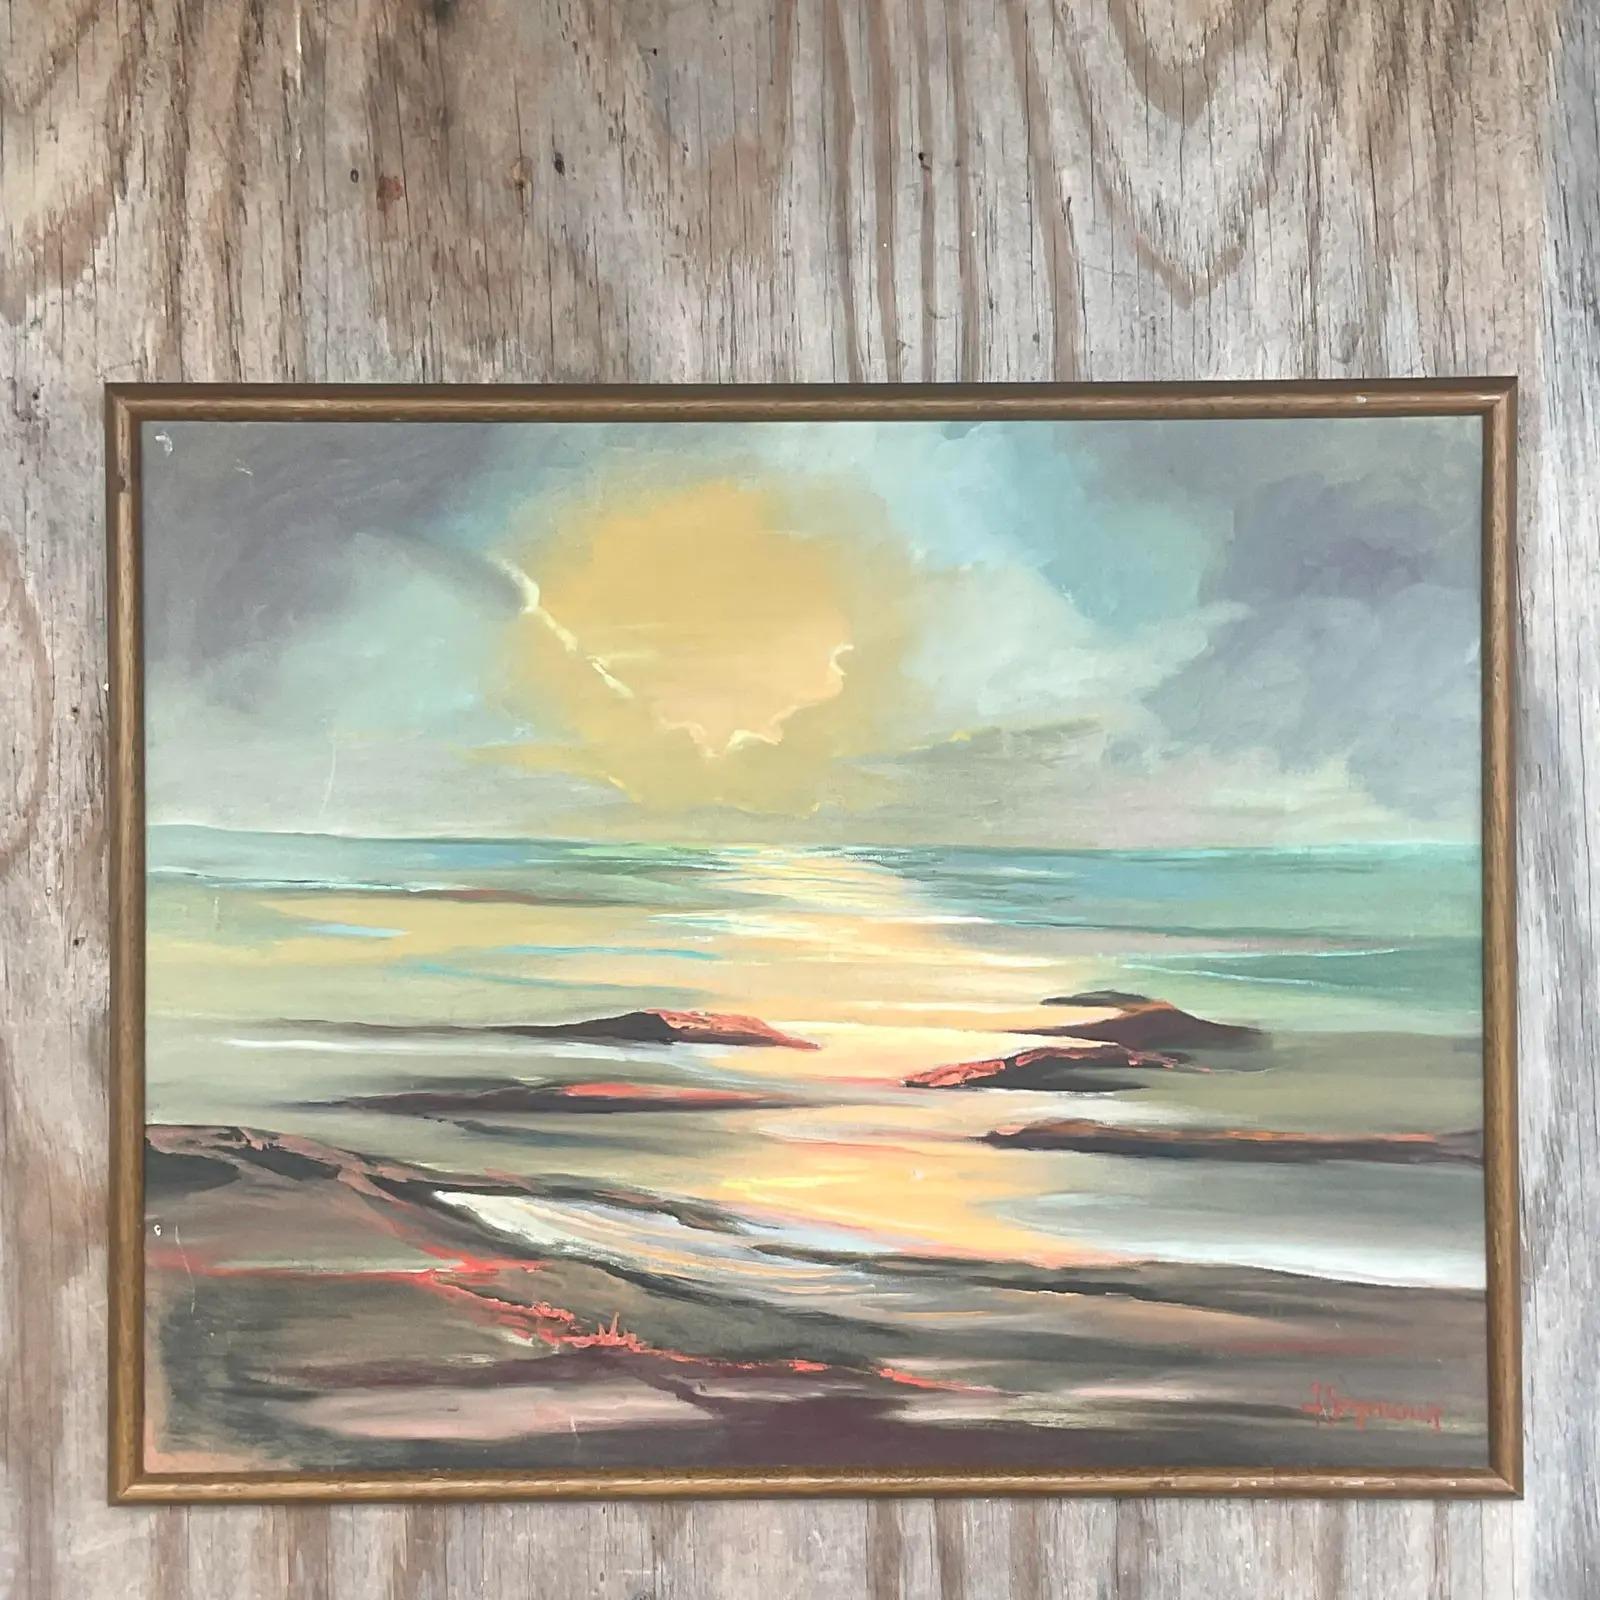 Vintage Boho Signed Original Oil Landscape on Canvas In Good Condition For Sale In west palm beach, FL